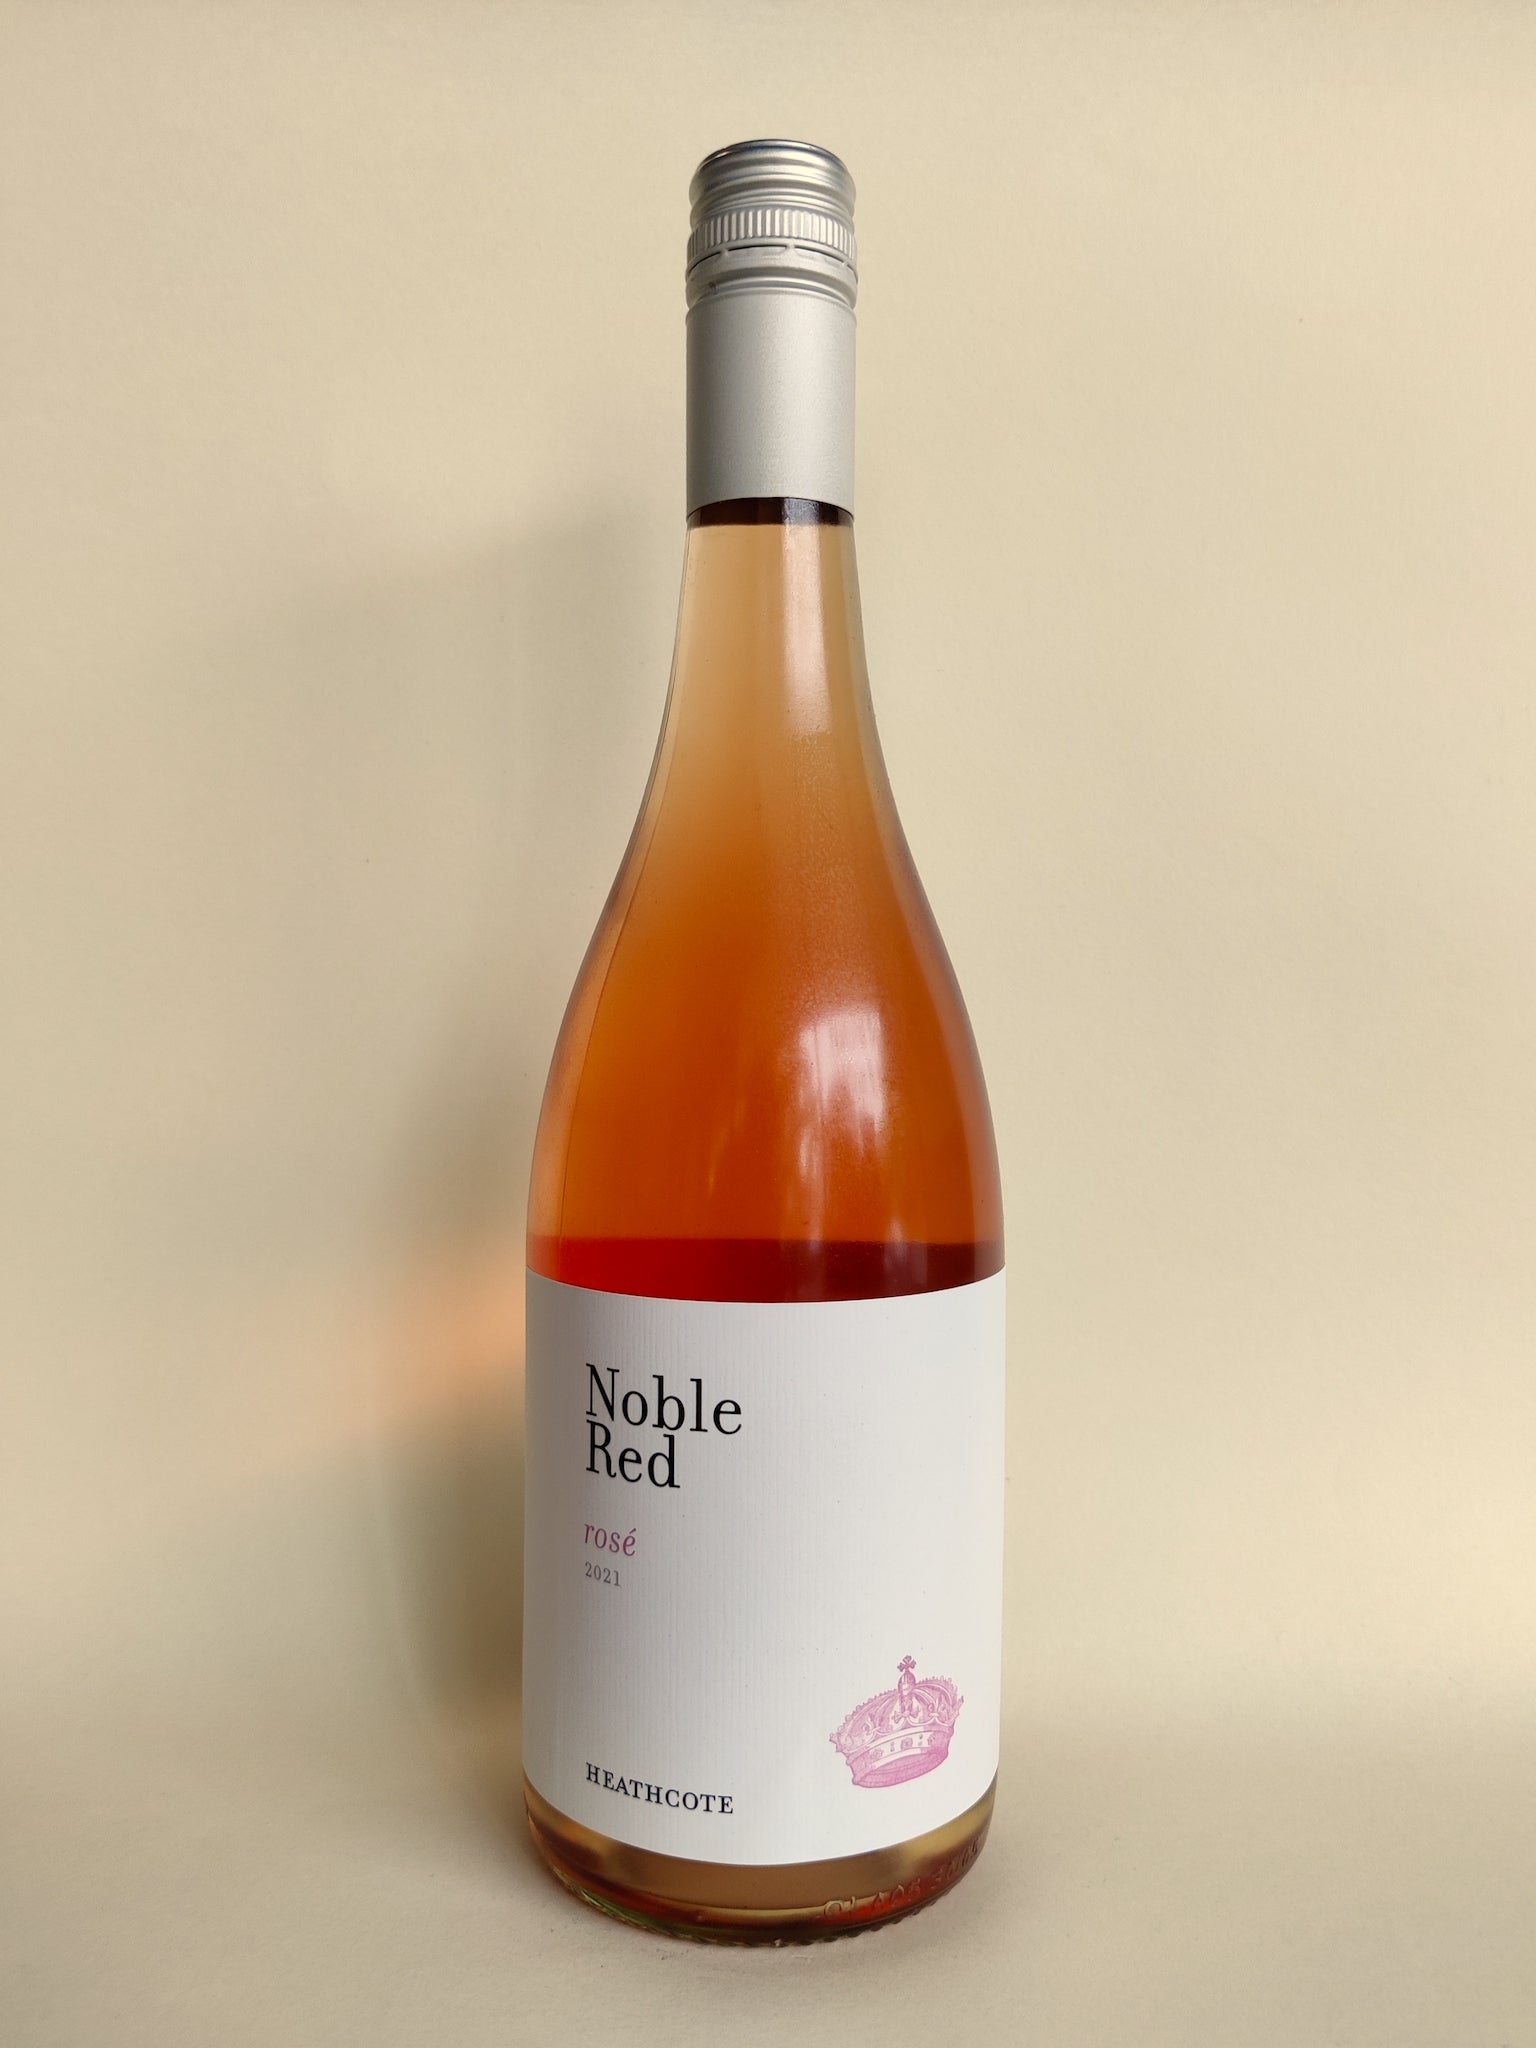 A bottle of Noble Red Rosé from Heathcote, Victoria. 